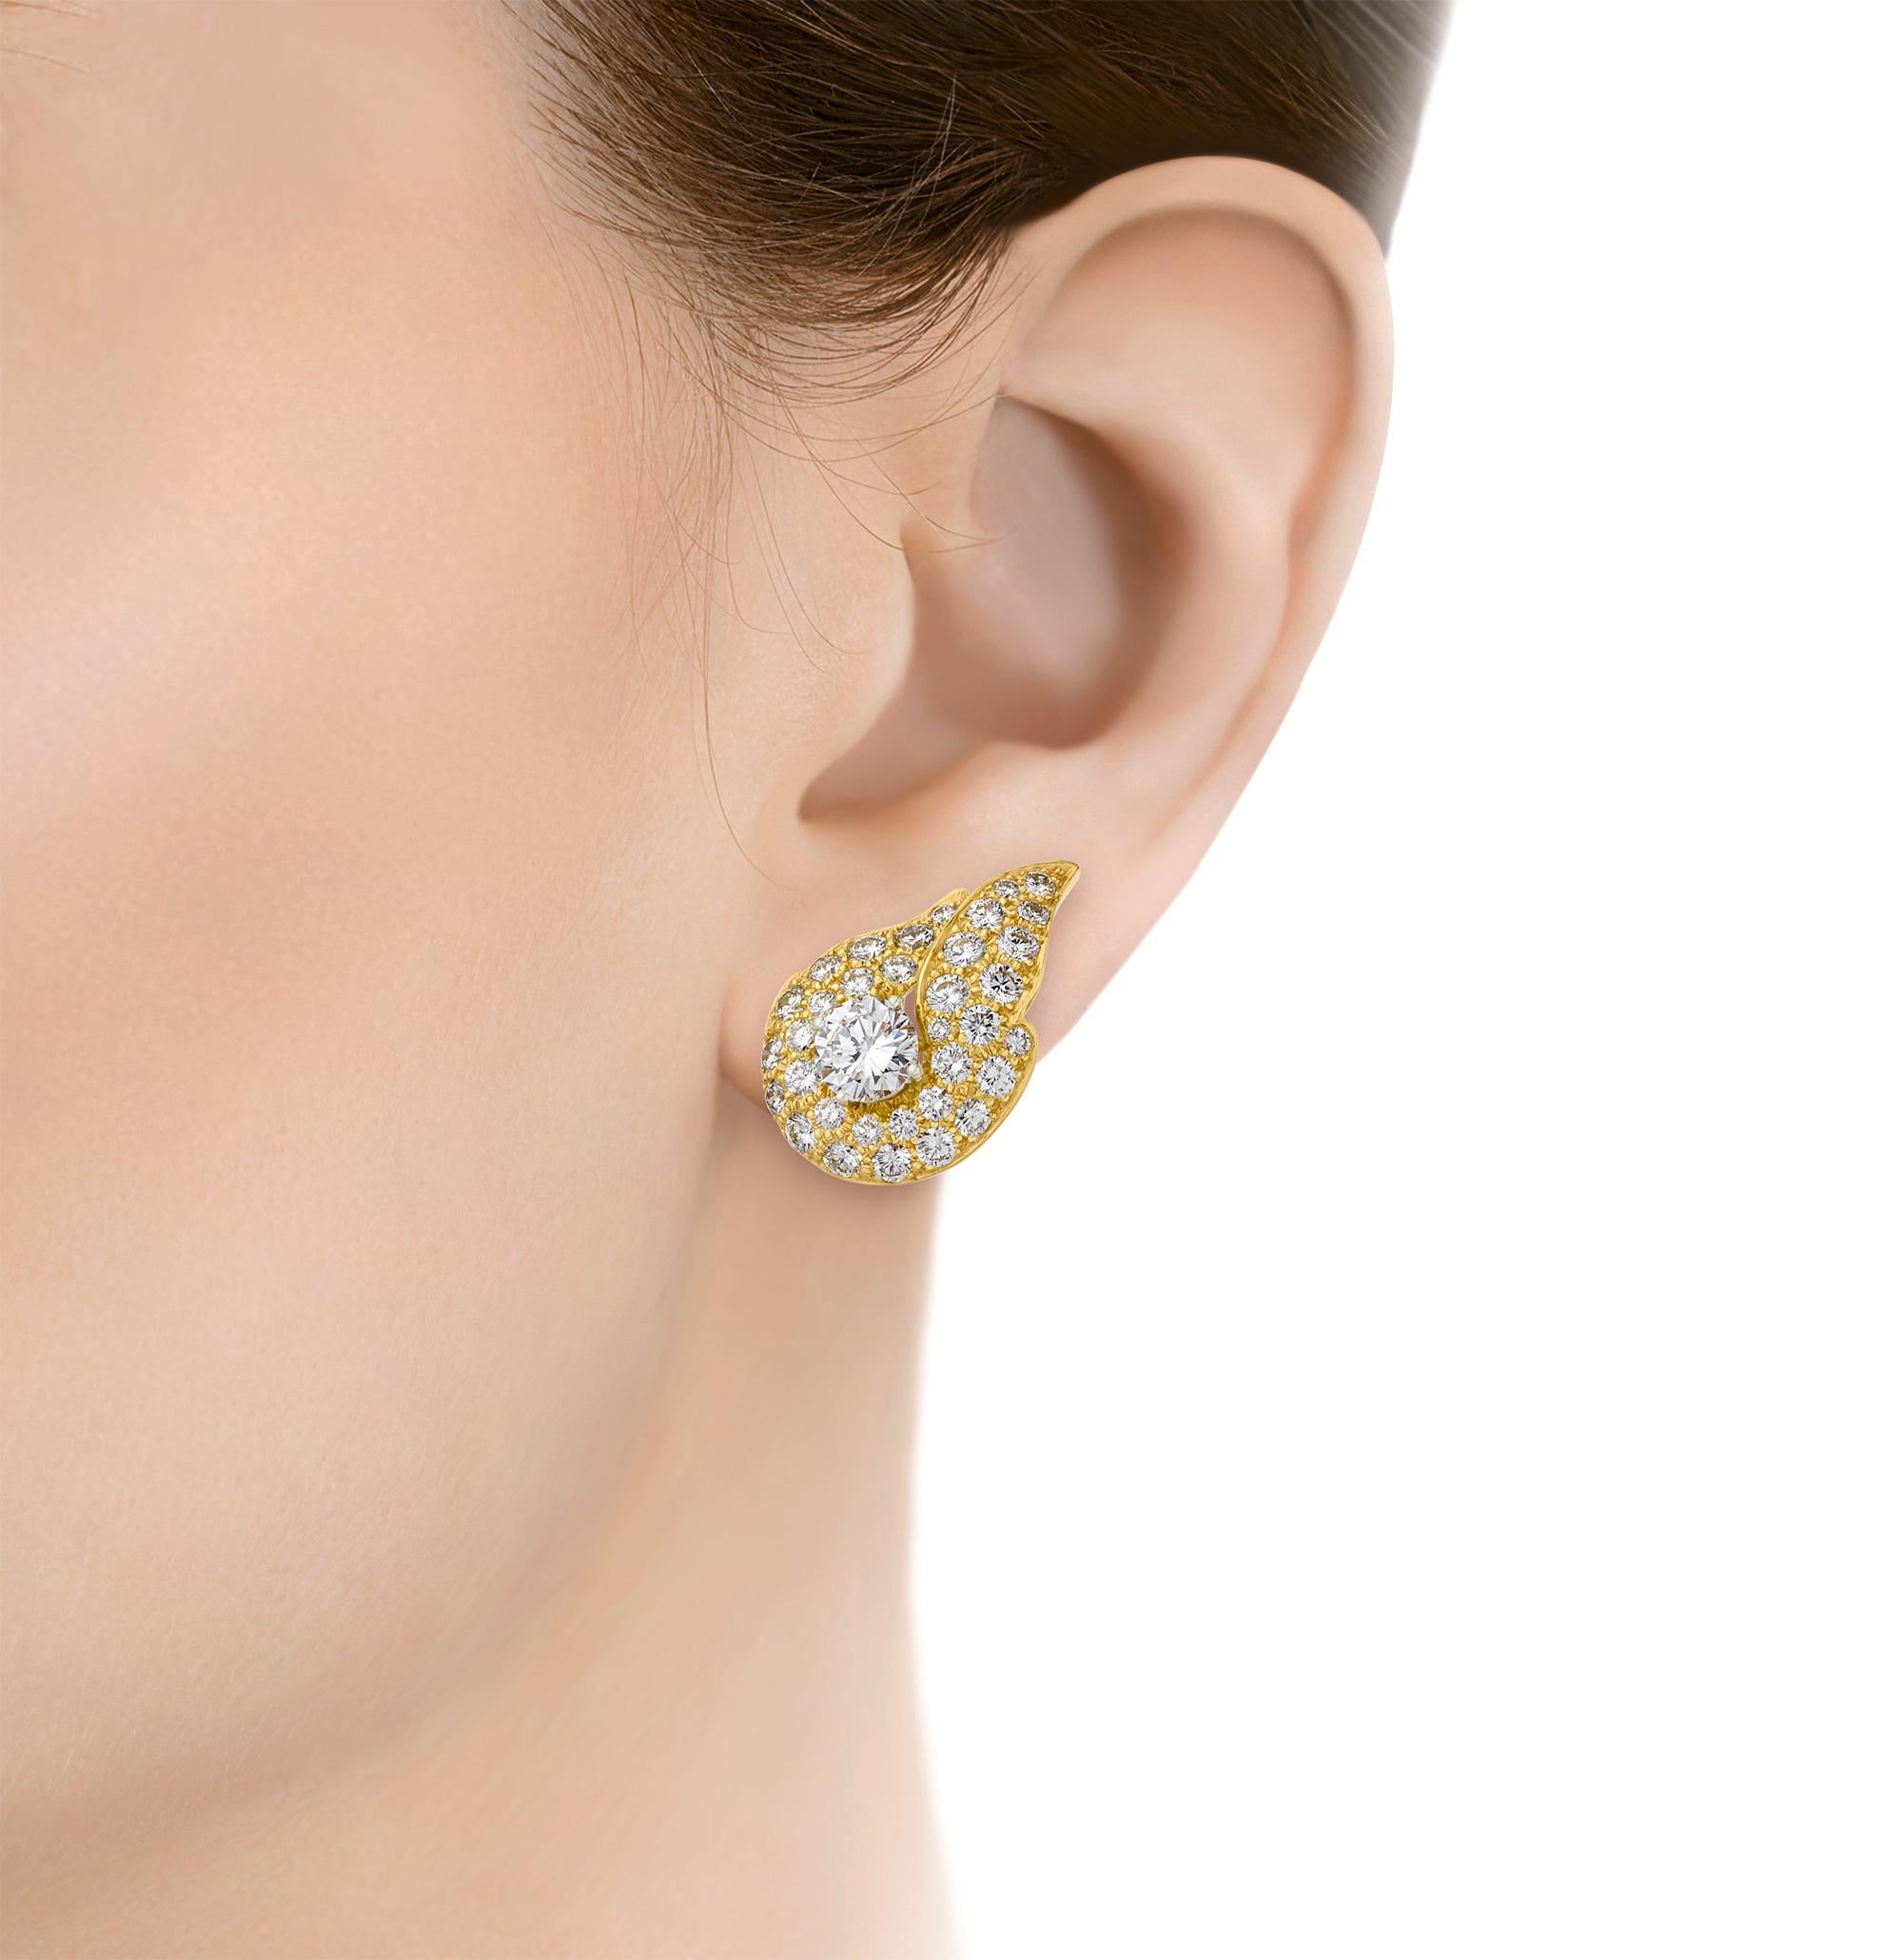 Timeless yet modern, these diamond earrings take the form of a flickering flame. Each earring centers a round brilliant-cut diamond, weighing 2.20 carats and 2.40 carats respectively, further elevated by pavé diamonds totaling 3.50 carats. Set in